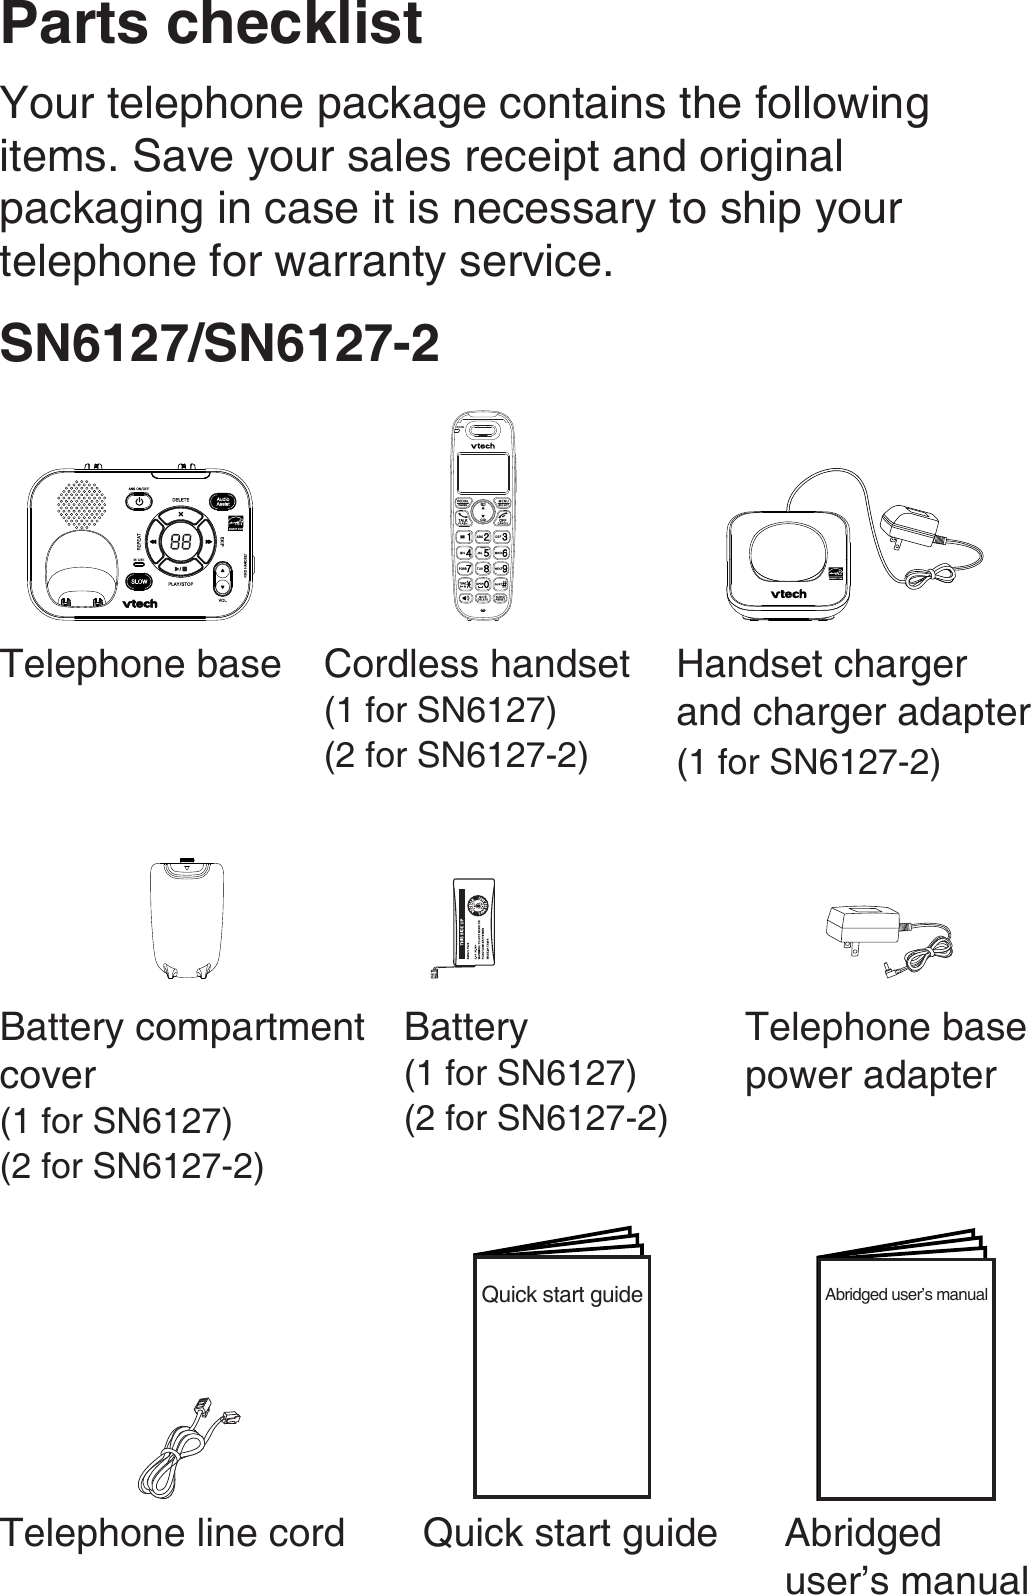 Parts checklistCordless handset(1 for SN6127)(2 for SN6127-2)Handset charger  and charger adapter(1 for SN6127-2)Battery compartment cover(1 for SN6127)(2 for SN6127-2)Battery(1 for SN6127)(2 for SN6127-2)Telephone base power adapterTelephone line cord Quick start guide Abridged user’s manualQuick start guide Abridged user’s manualYour telephone package contains the following items. Save your sales receipt and original packaging in case it is necessary to ship your telephone for warranty service.SN6127/SN6127-2Telephone base